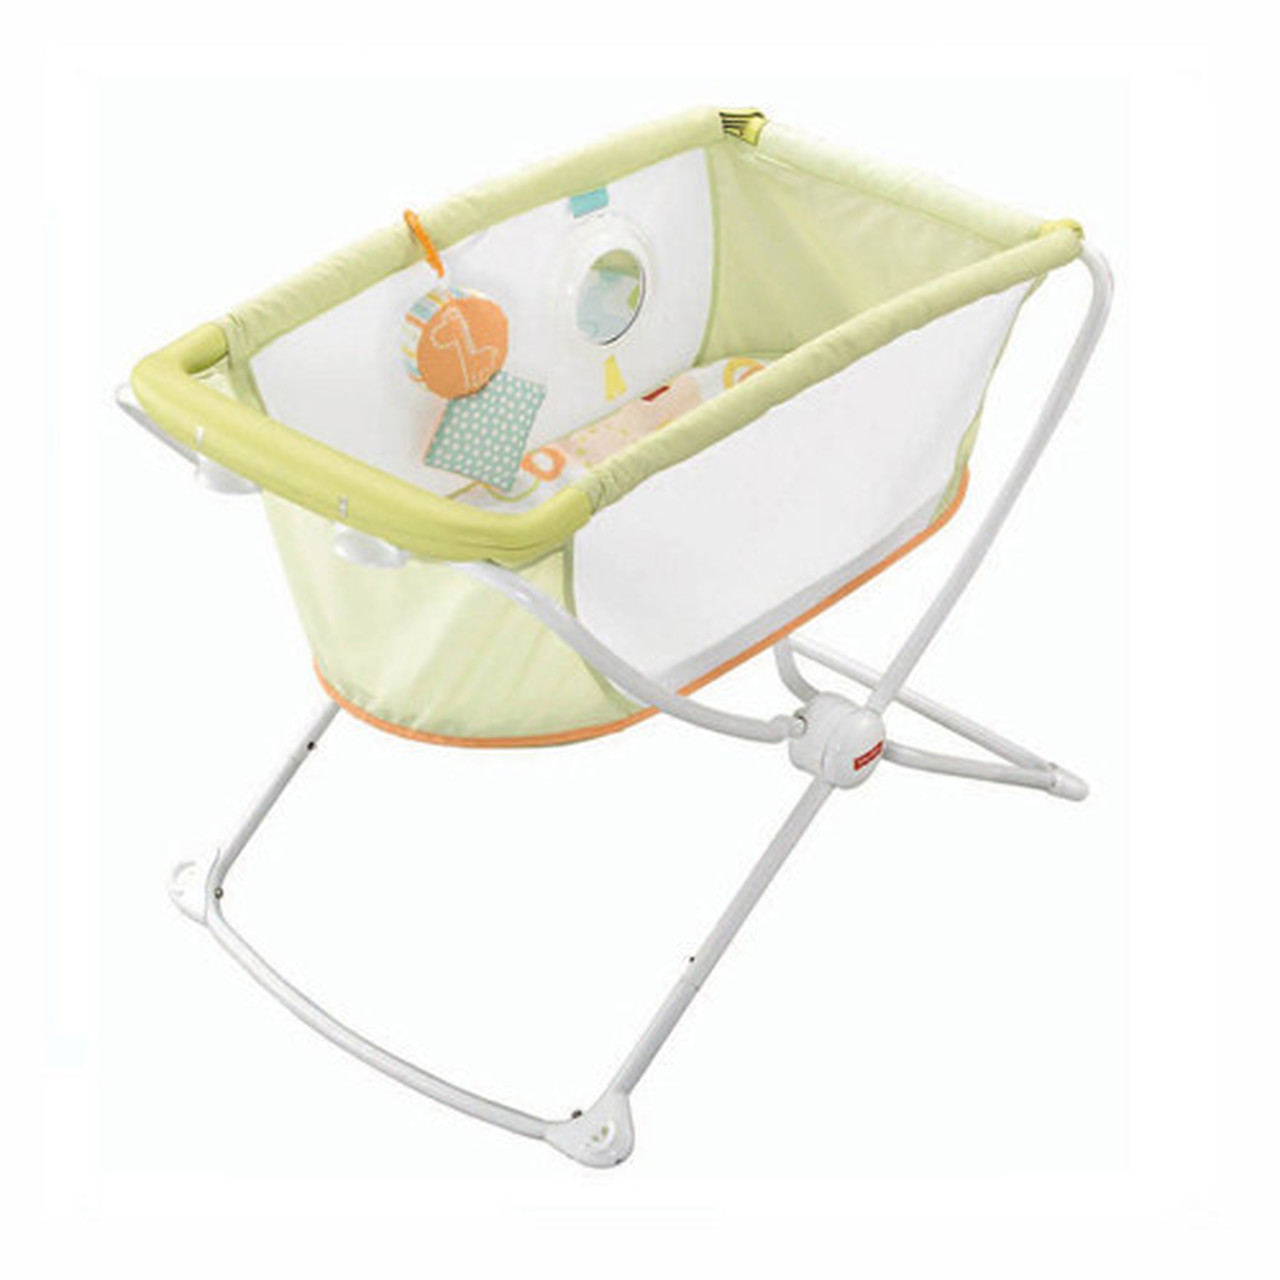 Fisher-Price Rock 'n Play Portable Bassinet Cozy Sleep Solution